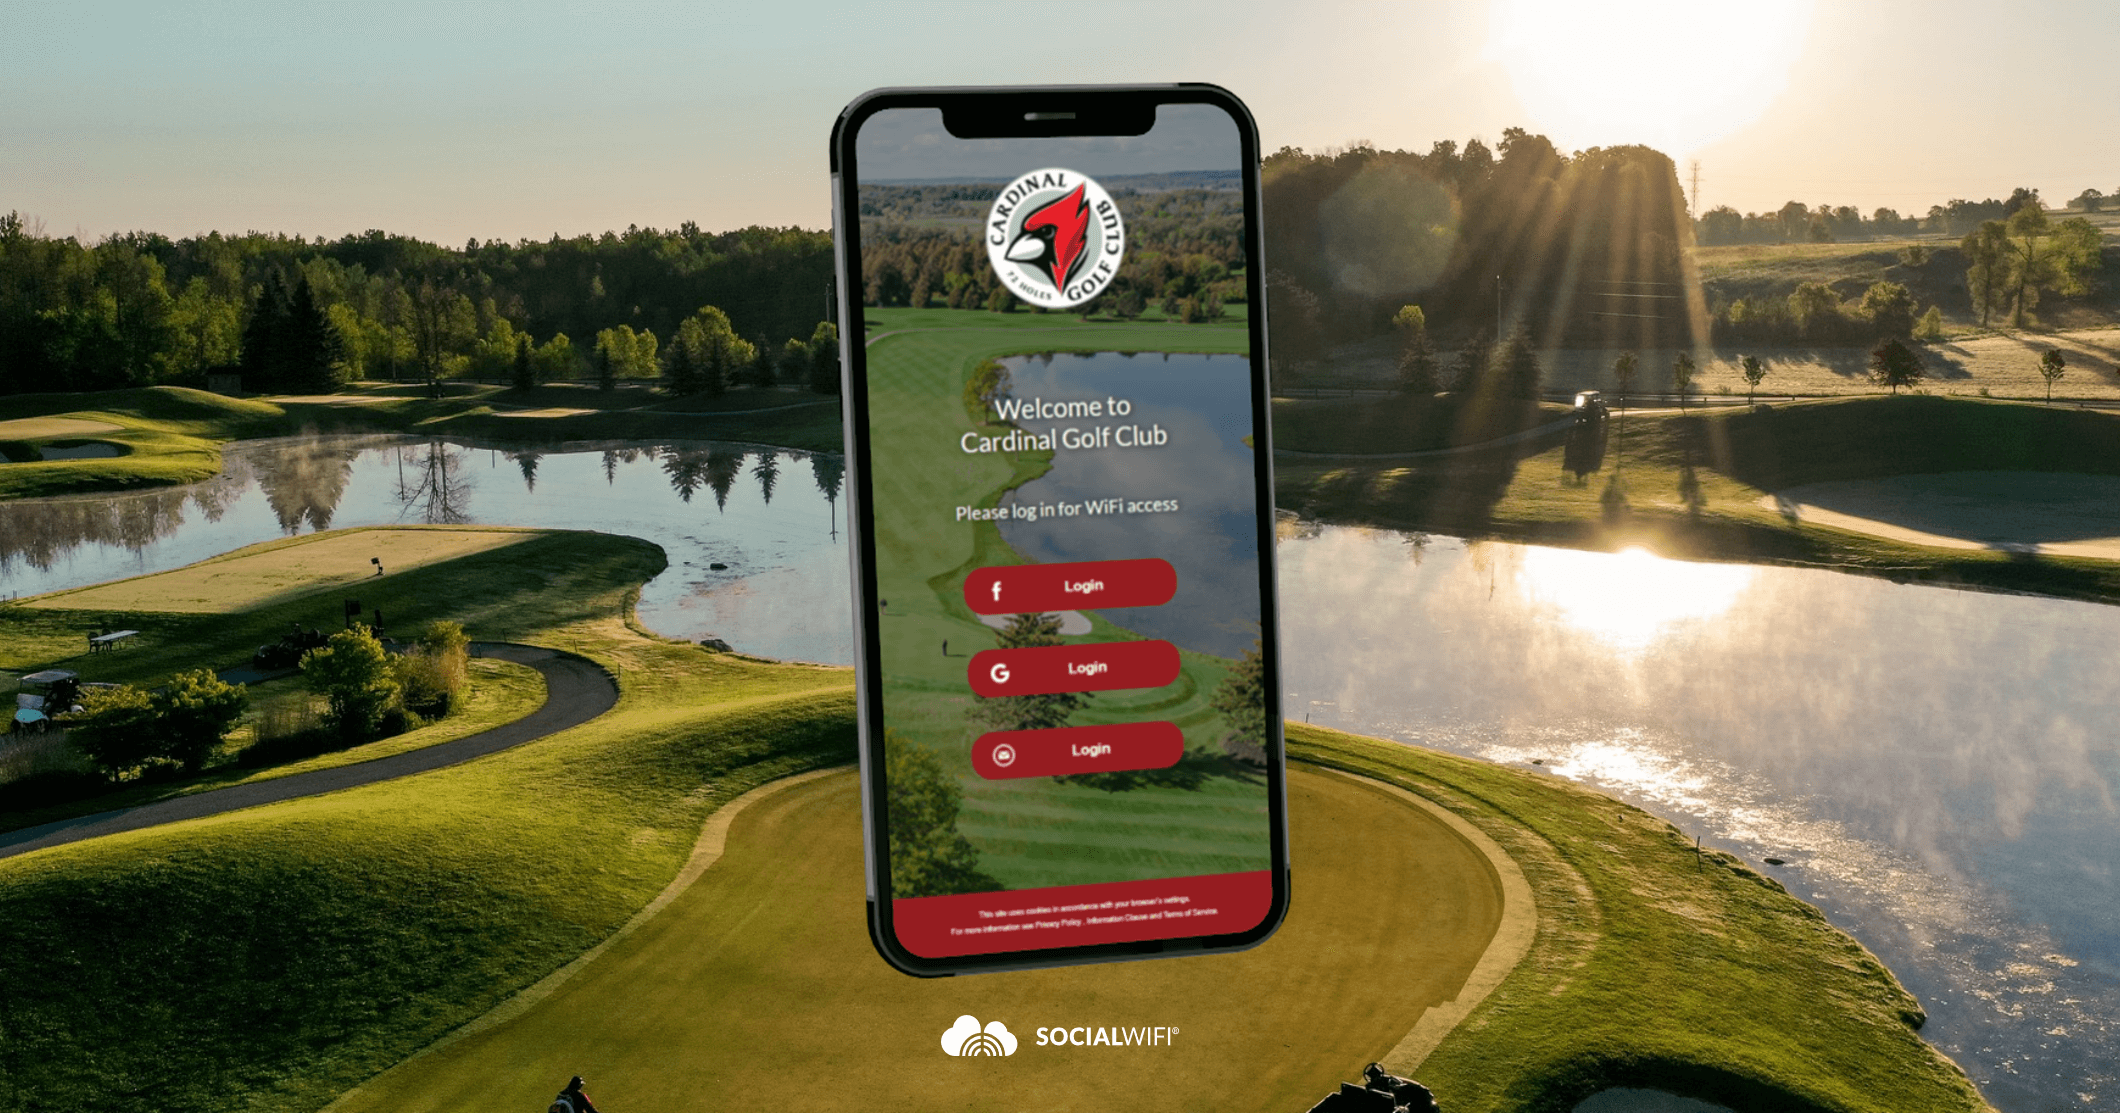 Cardinal Golf Club addresses the ball with their new guest WiFi